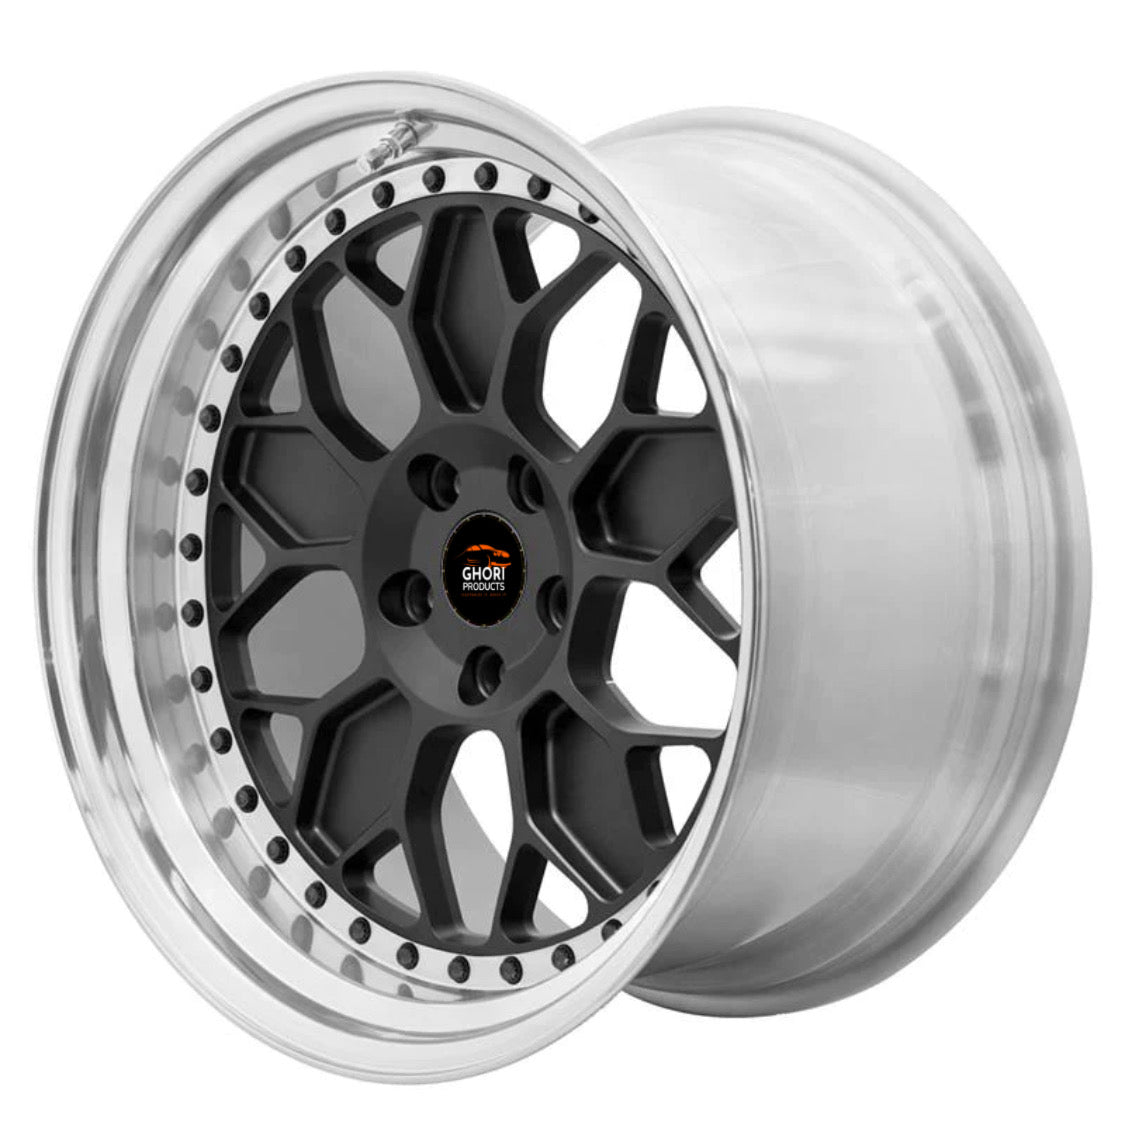 Dynamic ForgeX - Forged Aluminum T312 Wheels for Tesla Model S 5X120 (Set of 4)